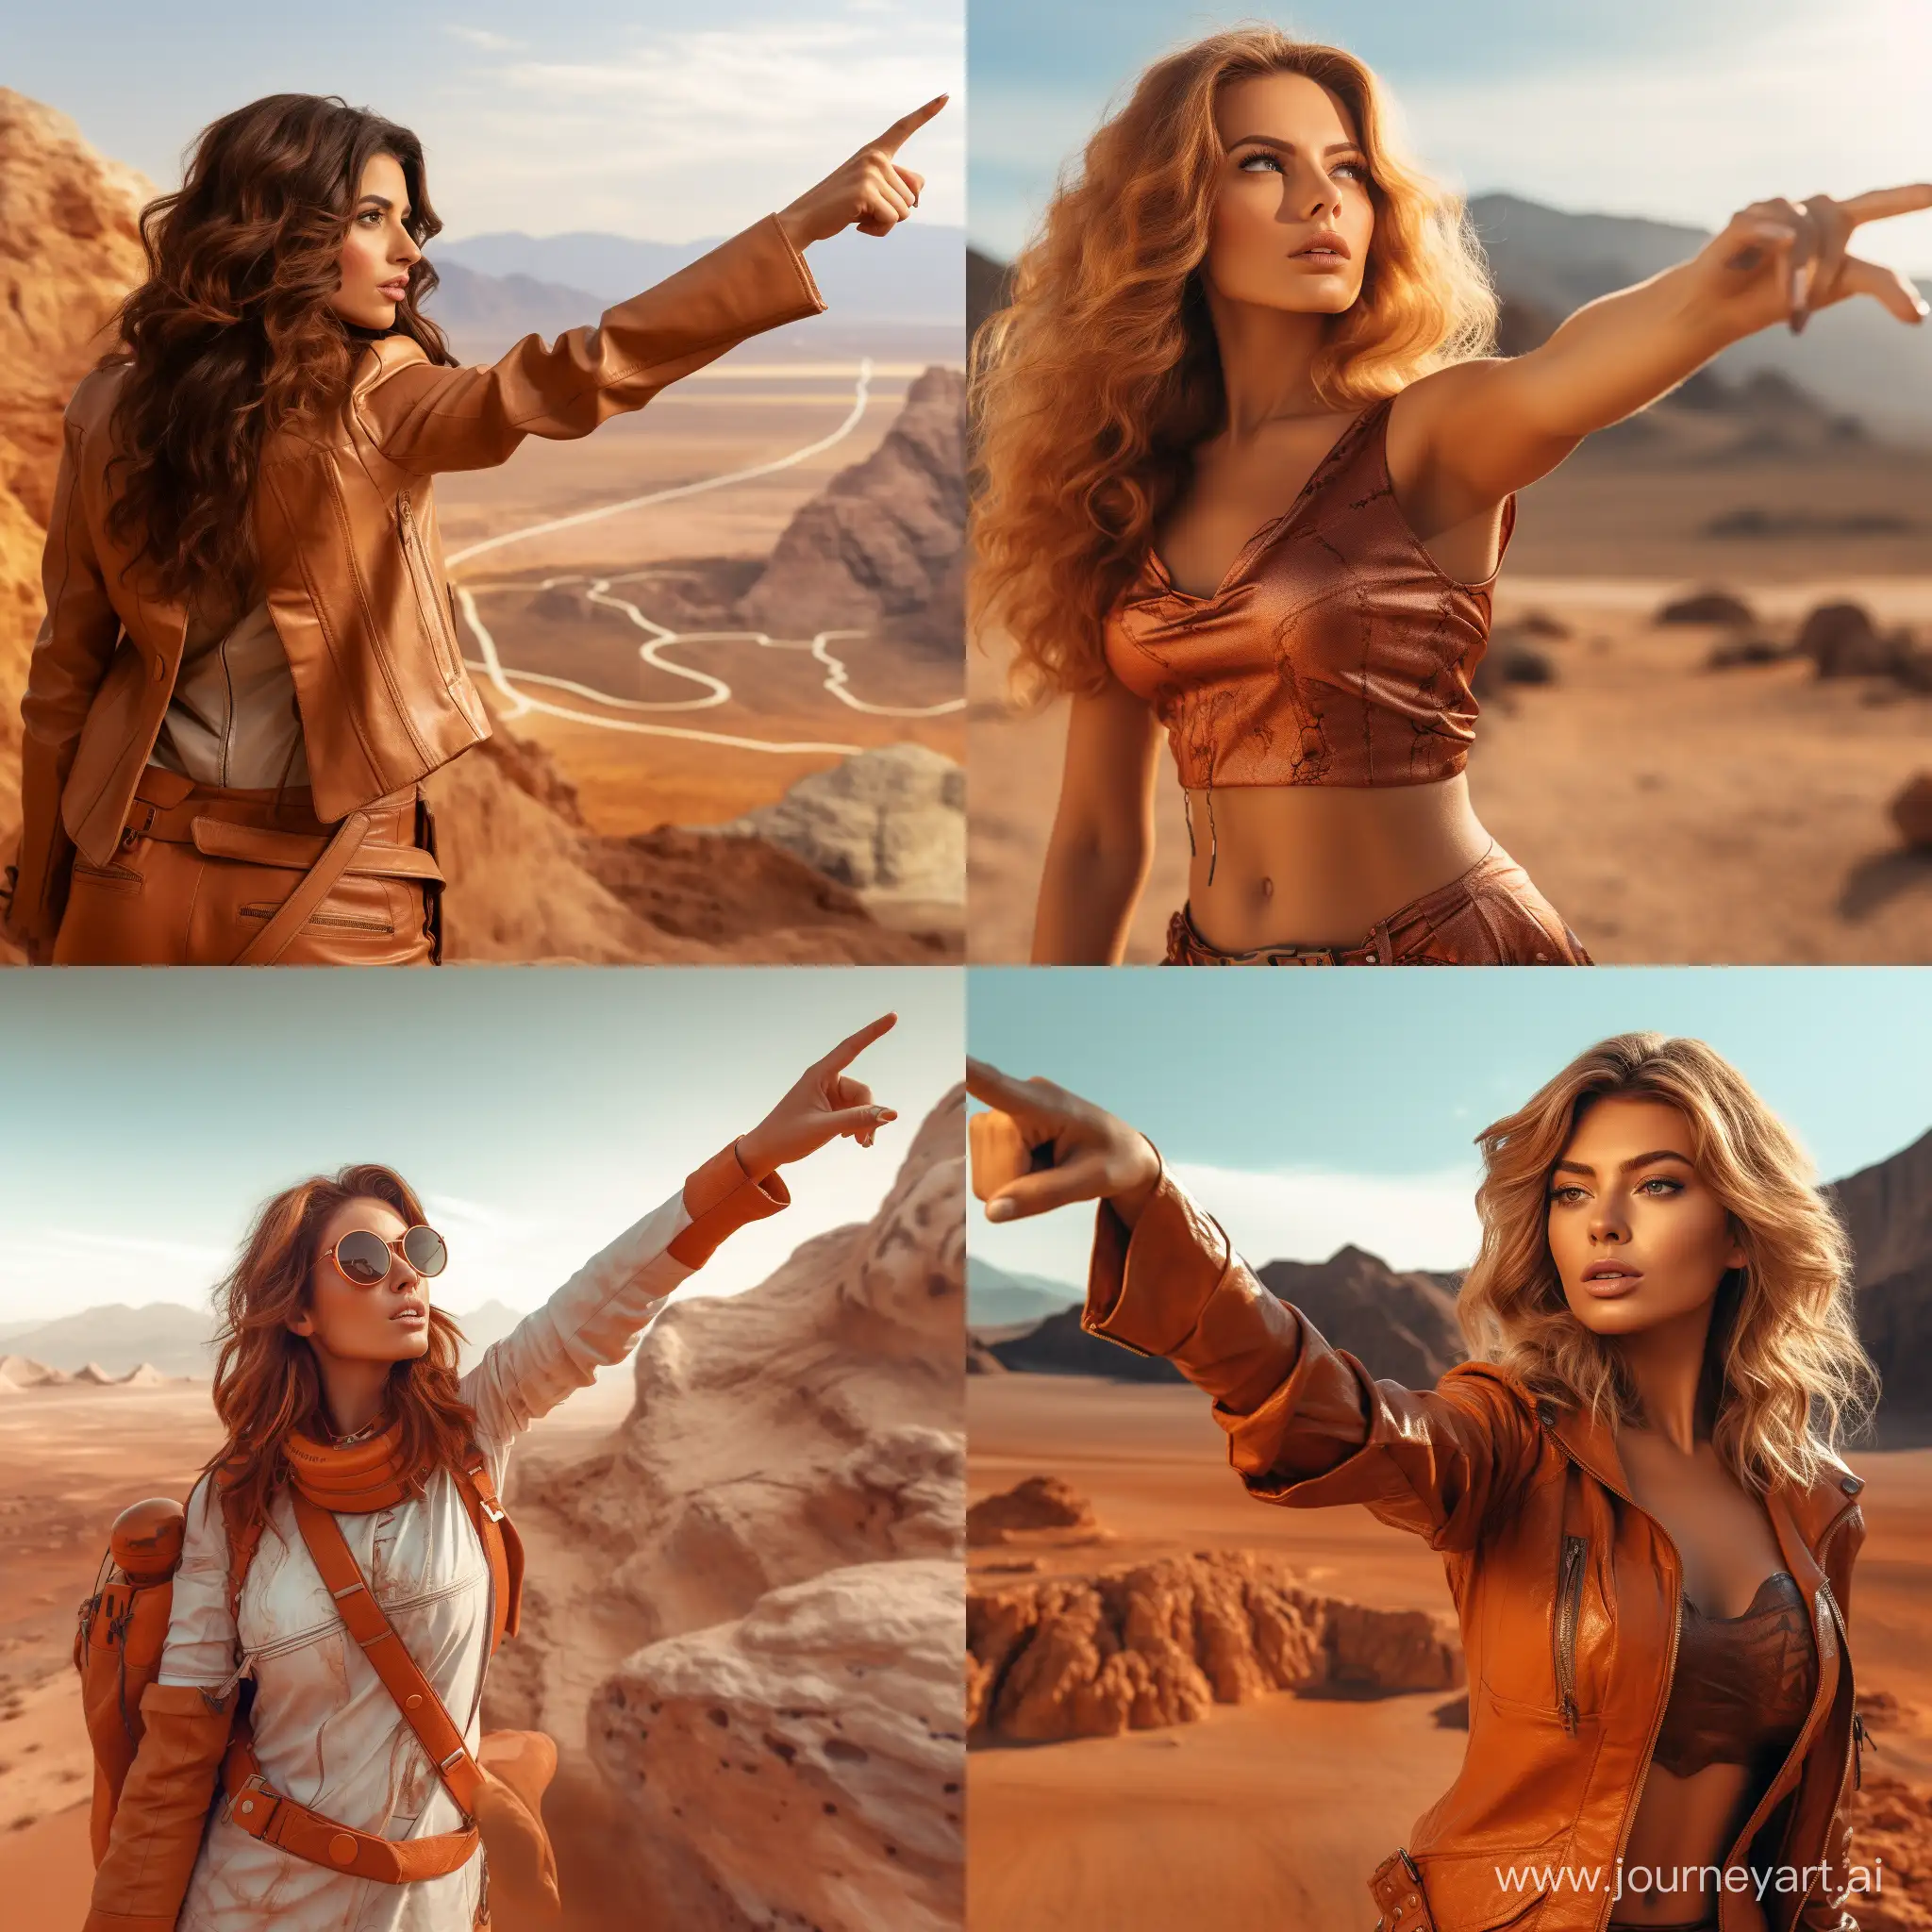 Stylish-Women-Model-Pointing-Out-Martian-Tourist-Attractions